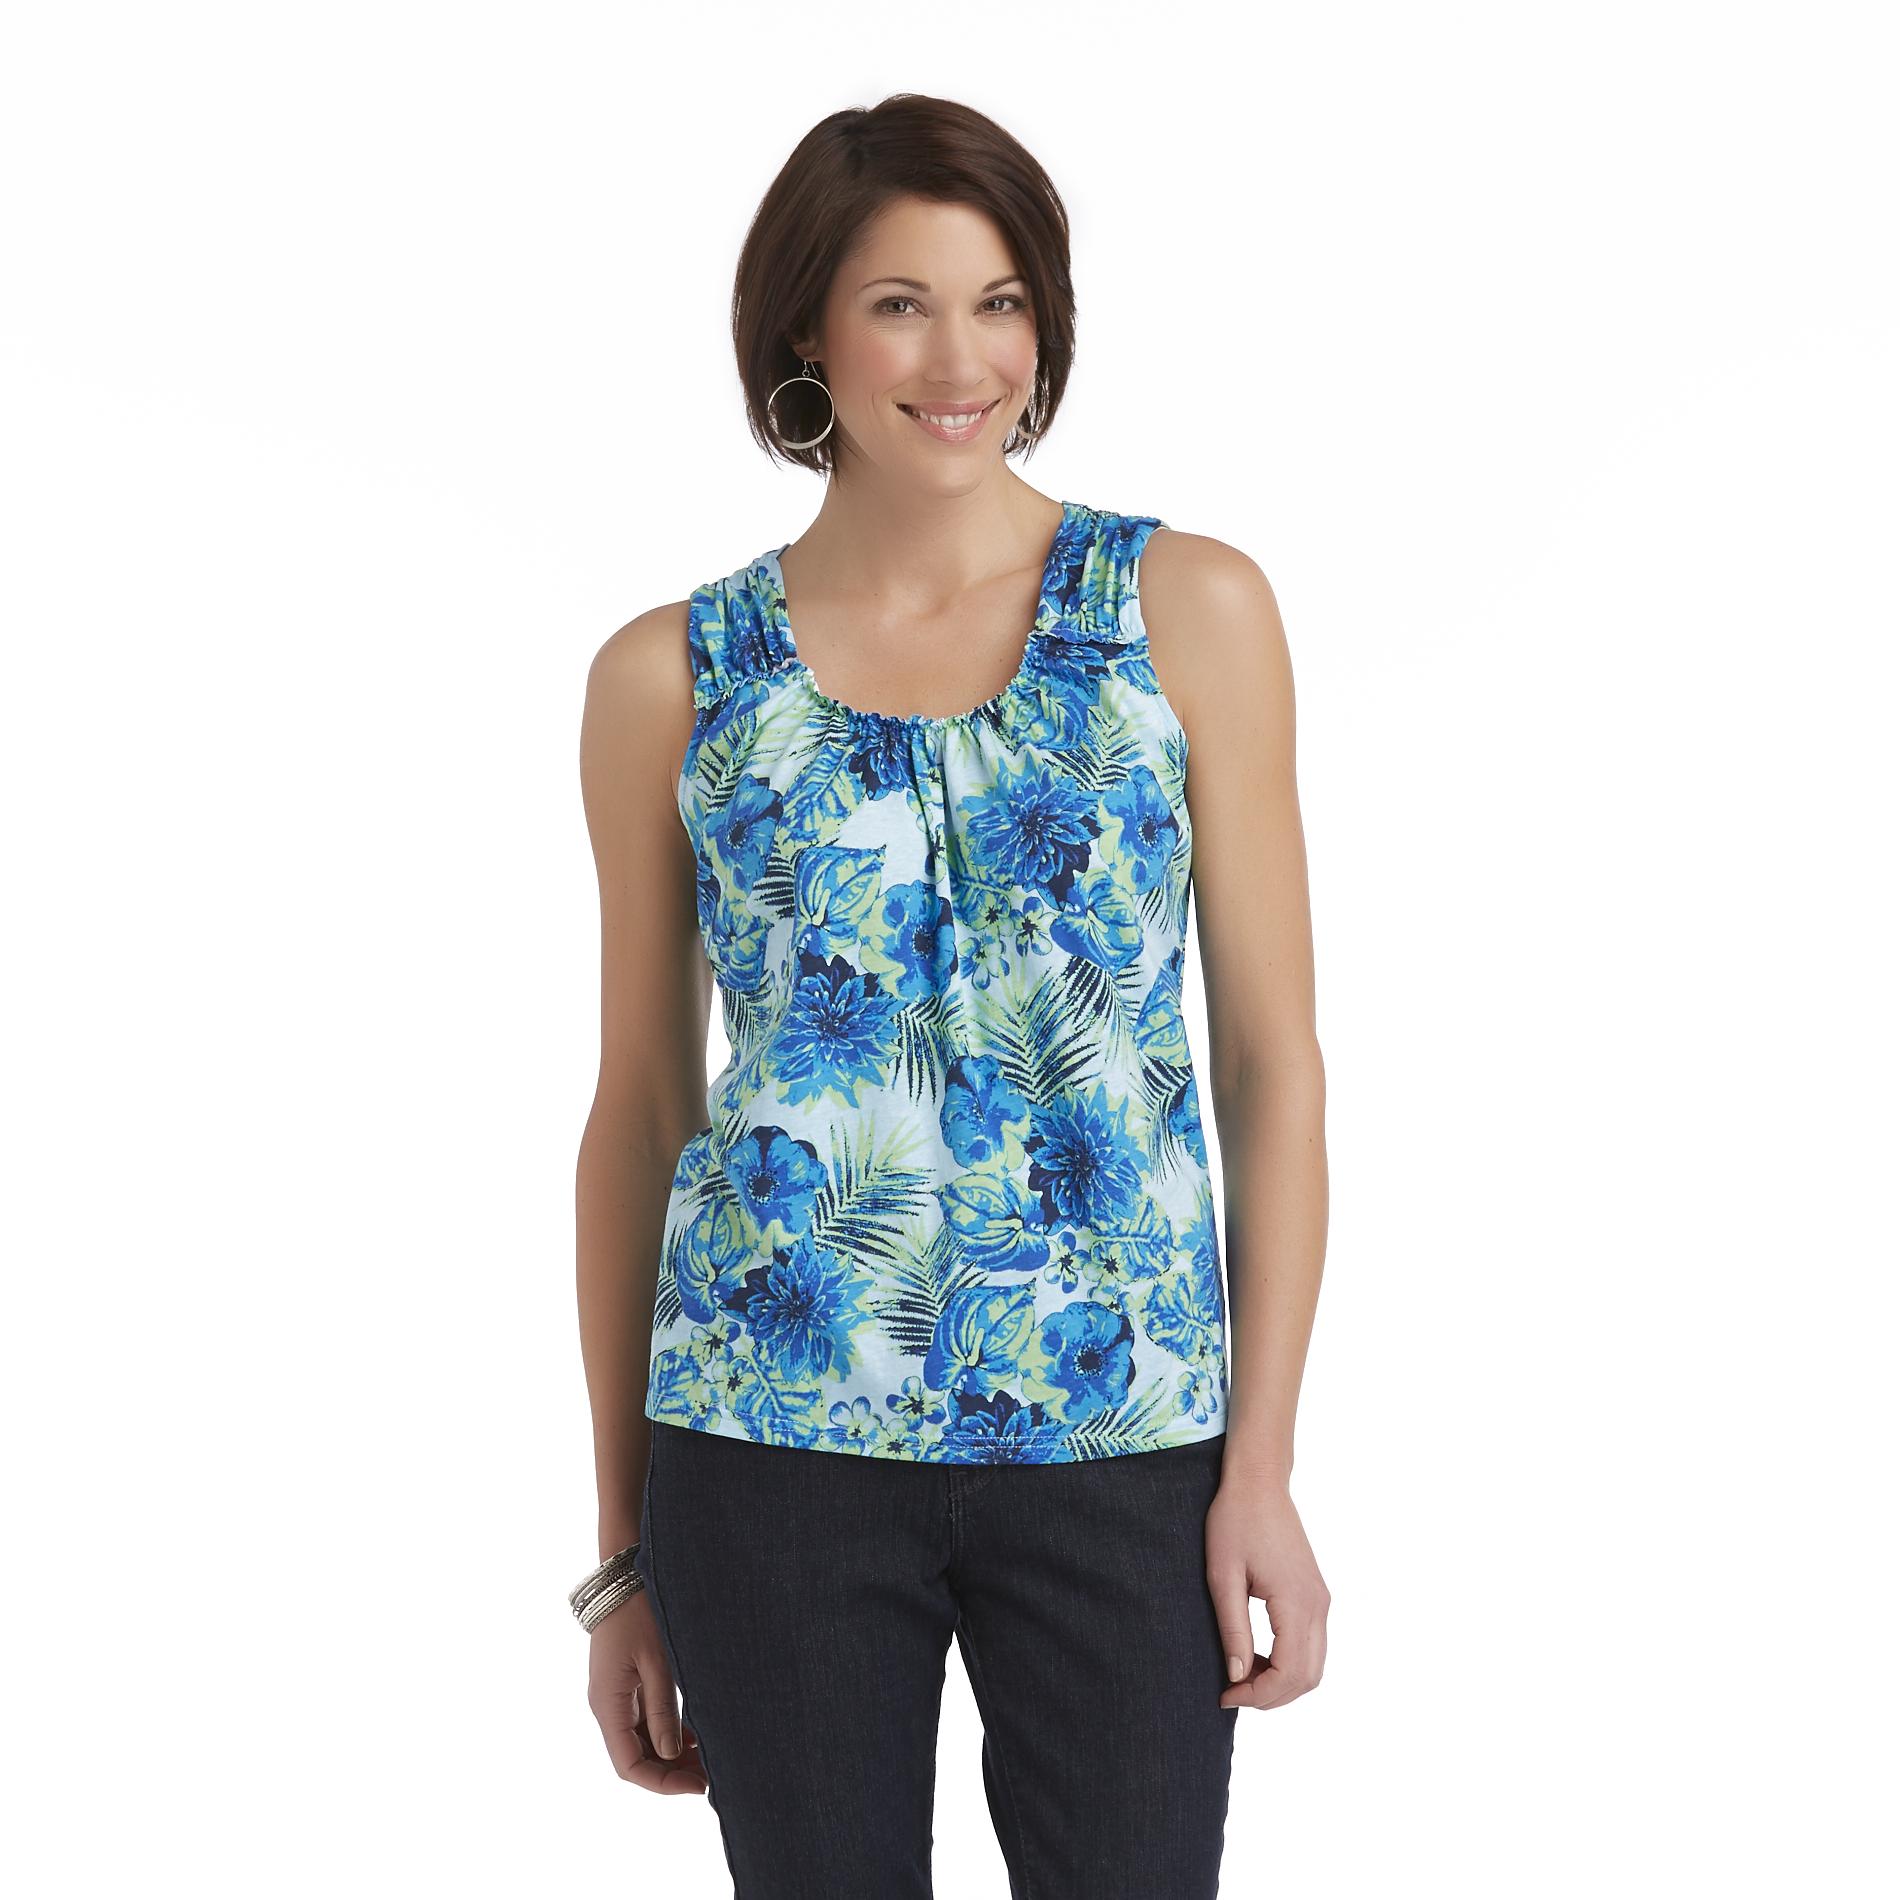 Basic Editions Women's Ruched-Shoulder Tank Top - Tropical Floral